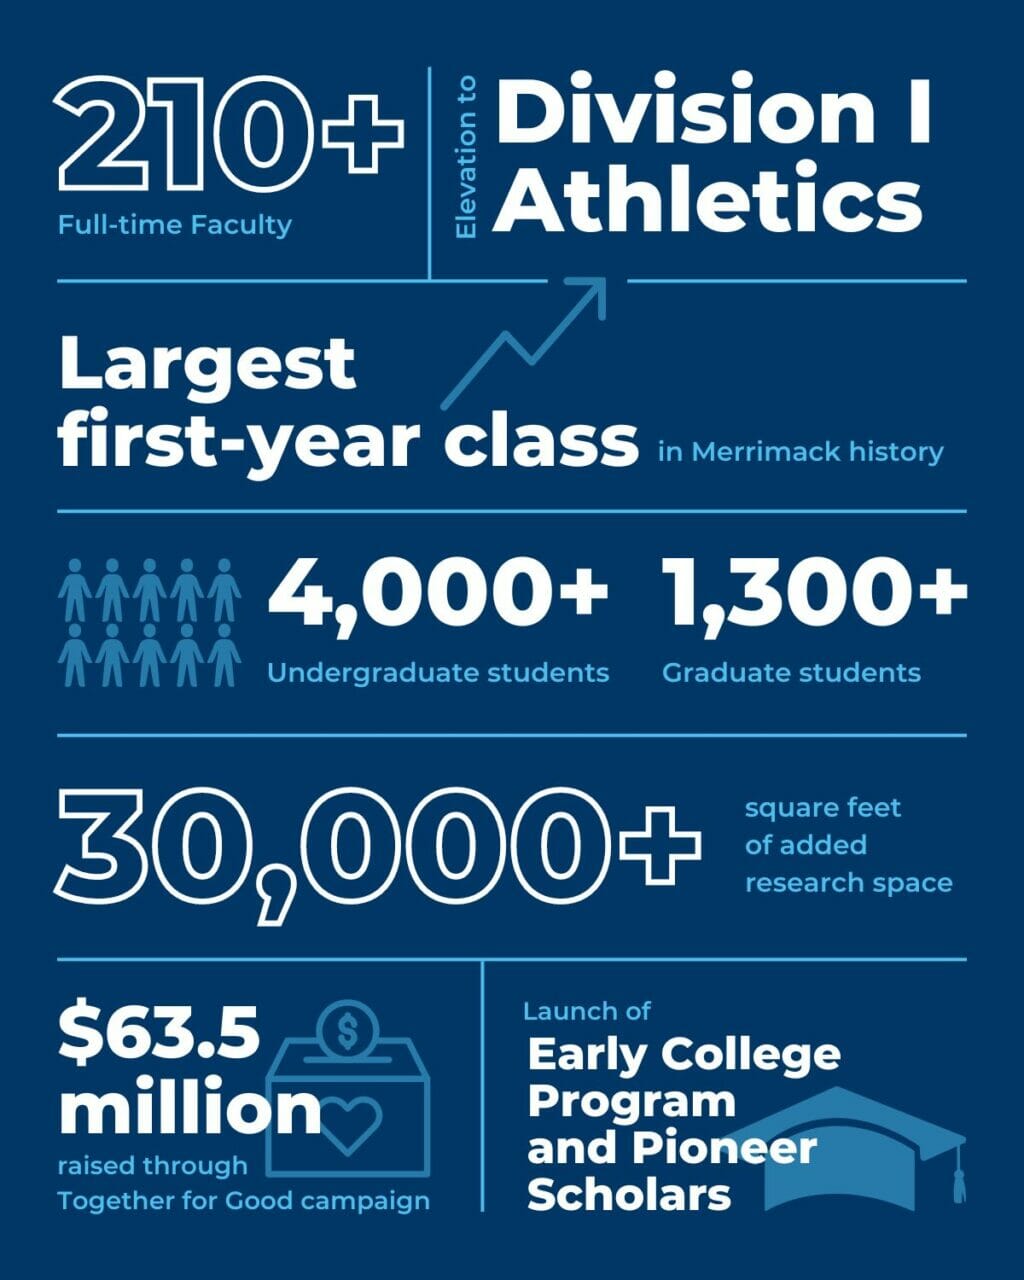 Infographic showing President Hopey's milestones, including 210+ full-time faculty, elevation to Division I Athletics, largest first-year class in Merrimack history, 30,000 square feet of added research space and $63.5 million raised through Together for Good campaign.